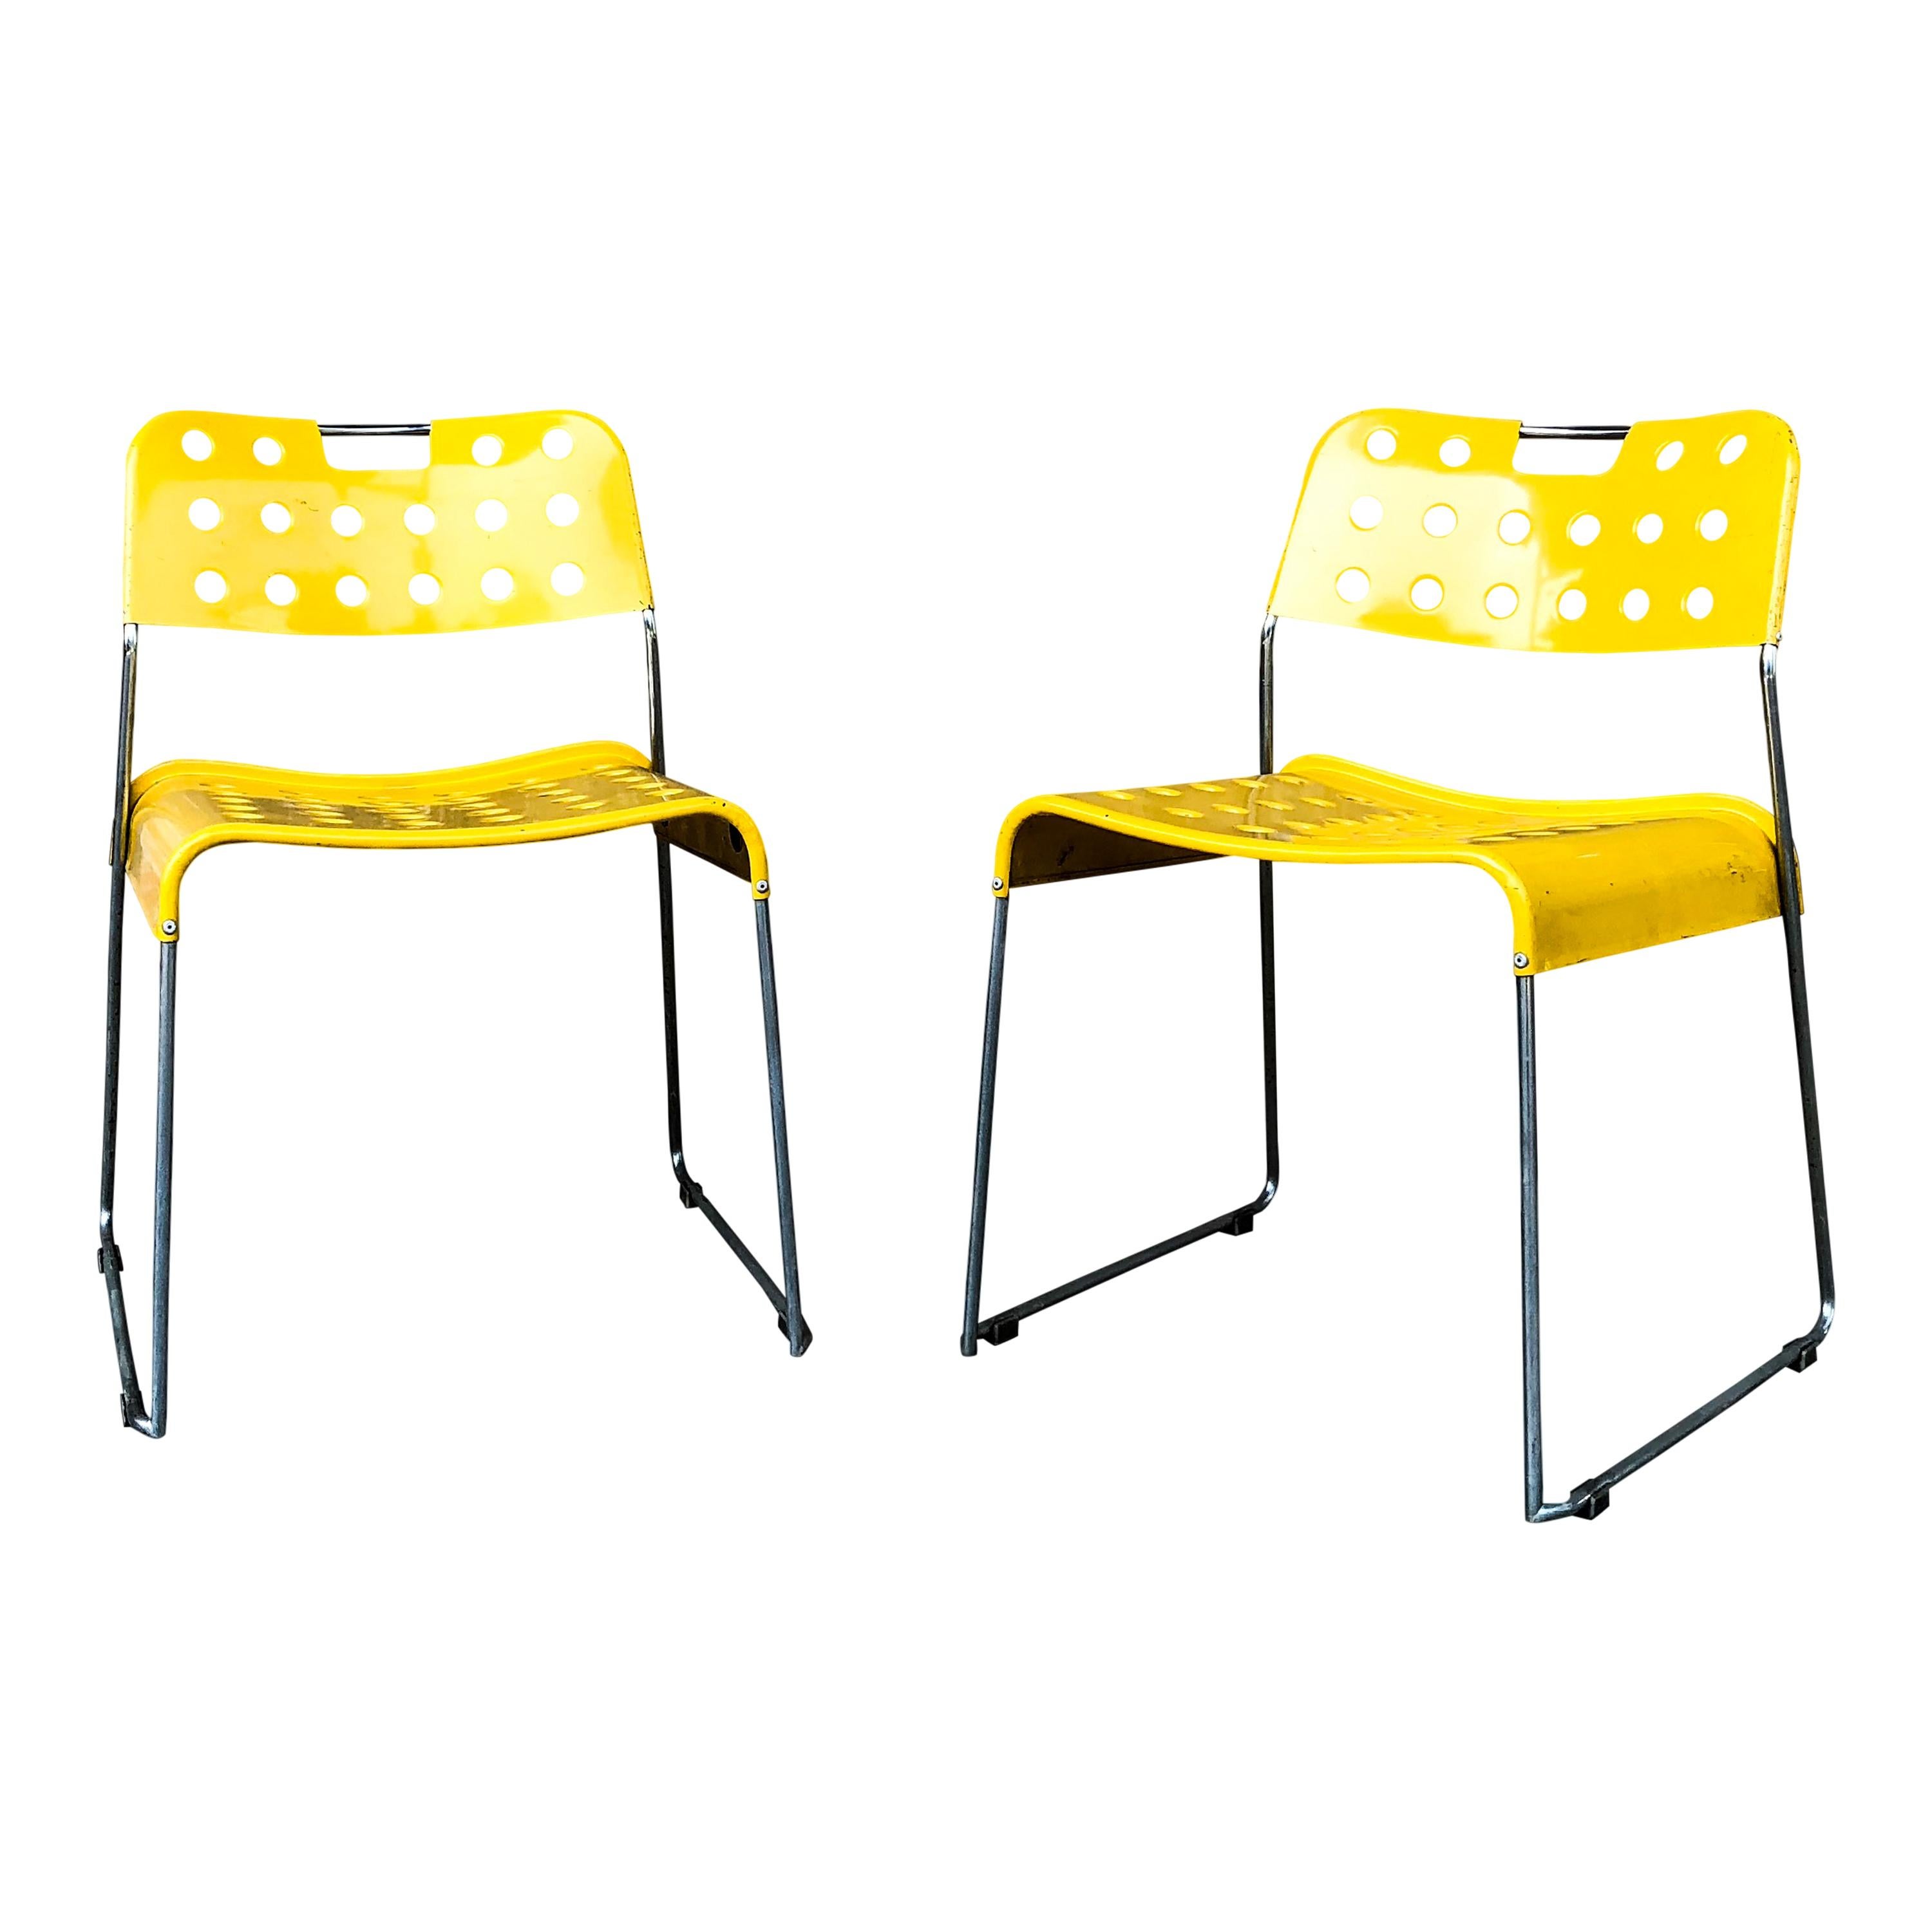 Rodney Kinsman Space Age Yellow Omstak Chair for Bieffeplast, 1971, Set of 18 For Sale 7